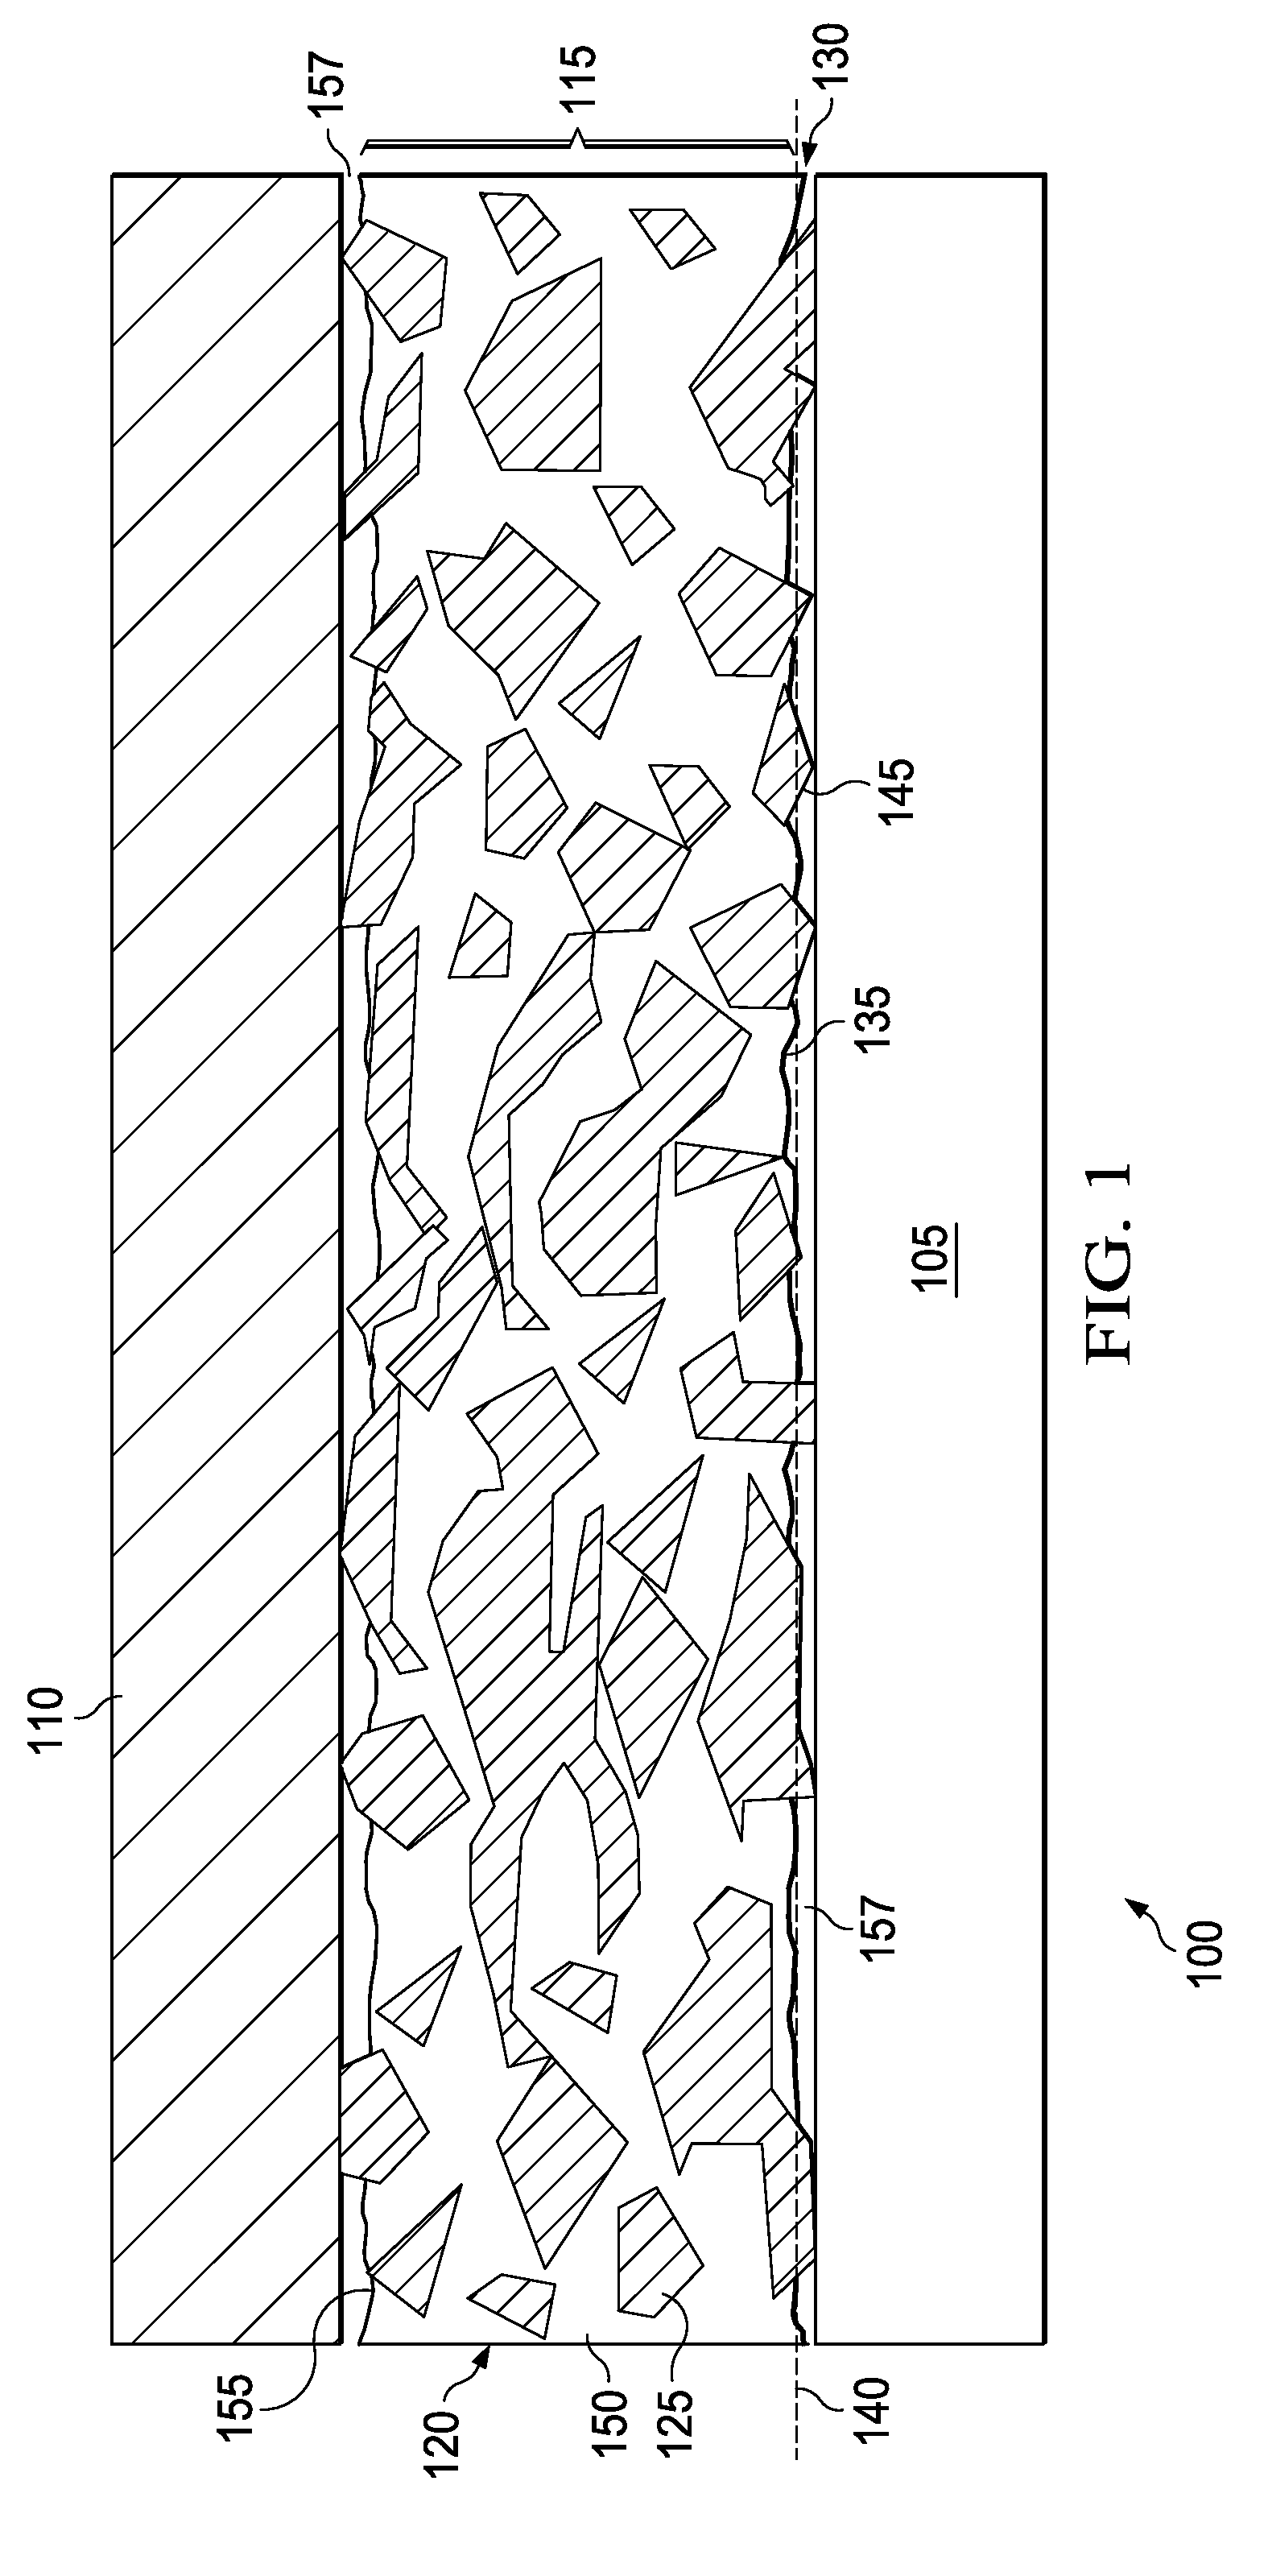 Thermal interface material design for enhanced thermal performance and improved package structural integrity